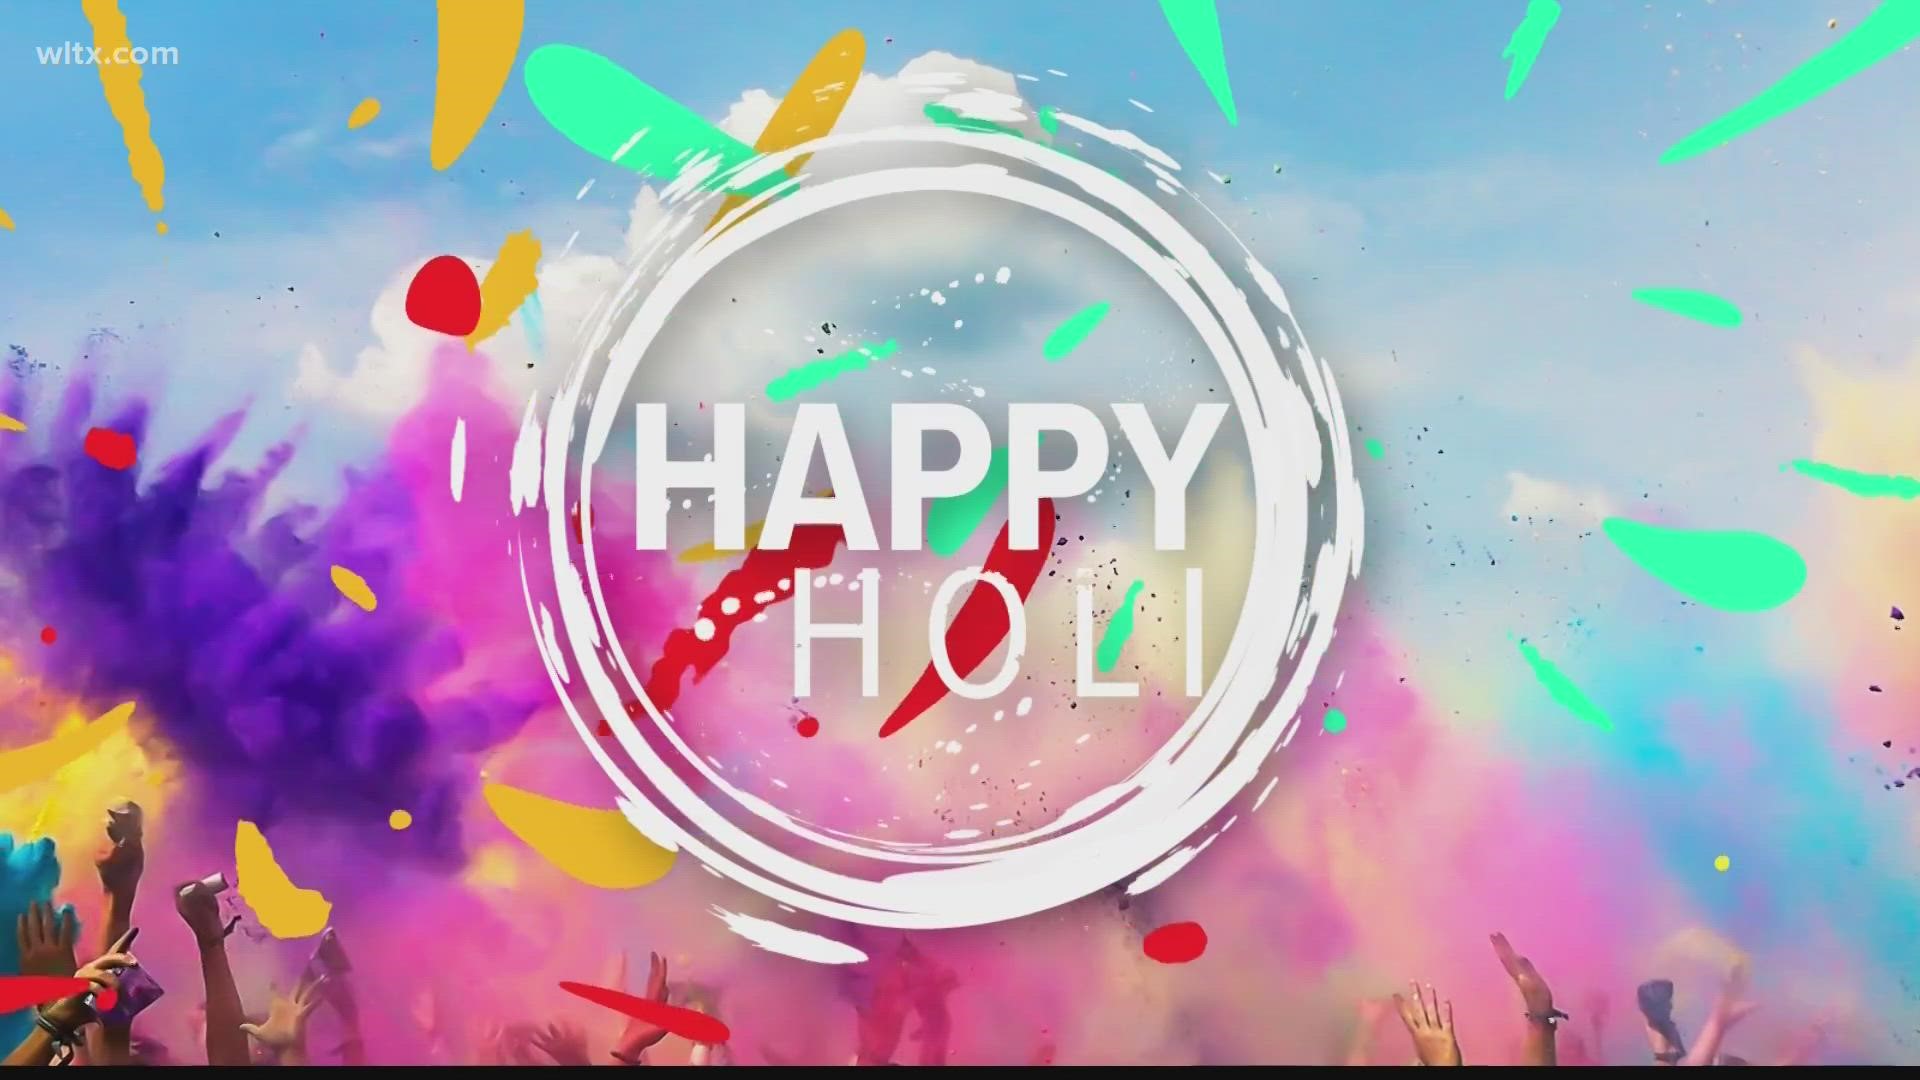 Holi, also known as the Festival of Colors, is an annual tradition in the Hindu community celebrating the beginning of spring.